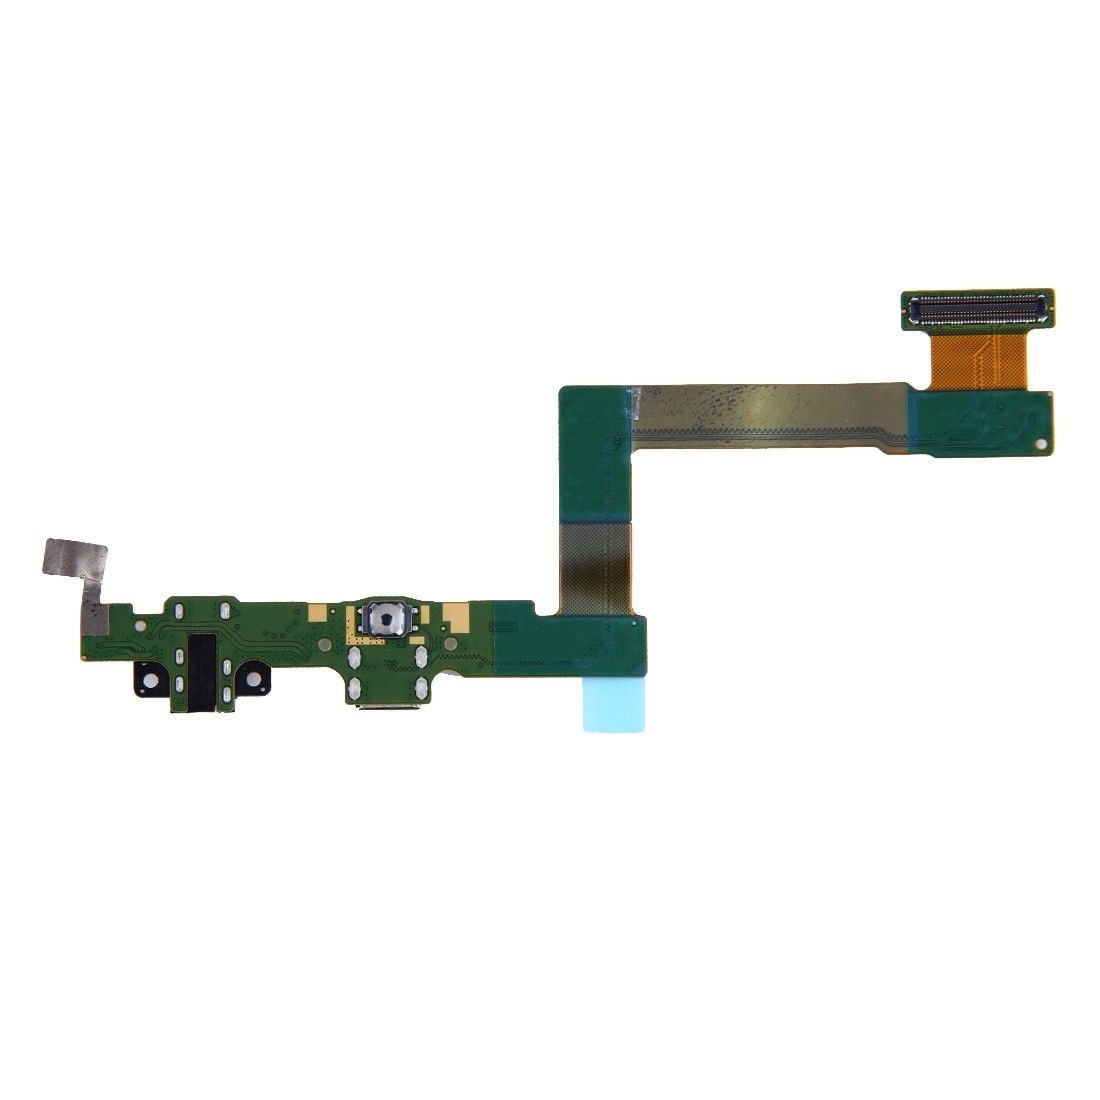 Samsung Galaxy Tab A 9.7 P550 USB Charging Port Connector Flex Cable for [product_price] - First Help Tech